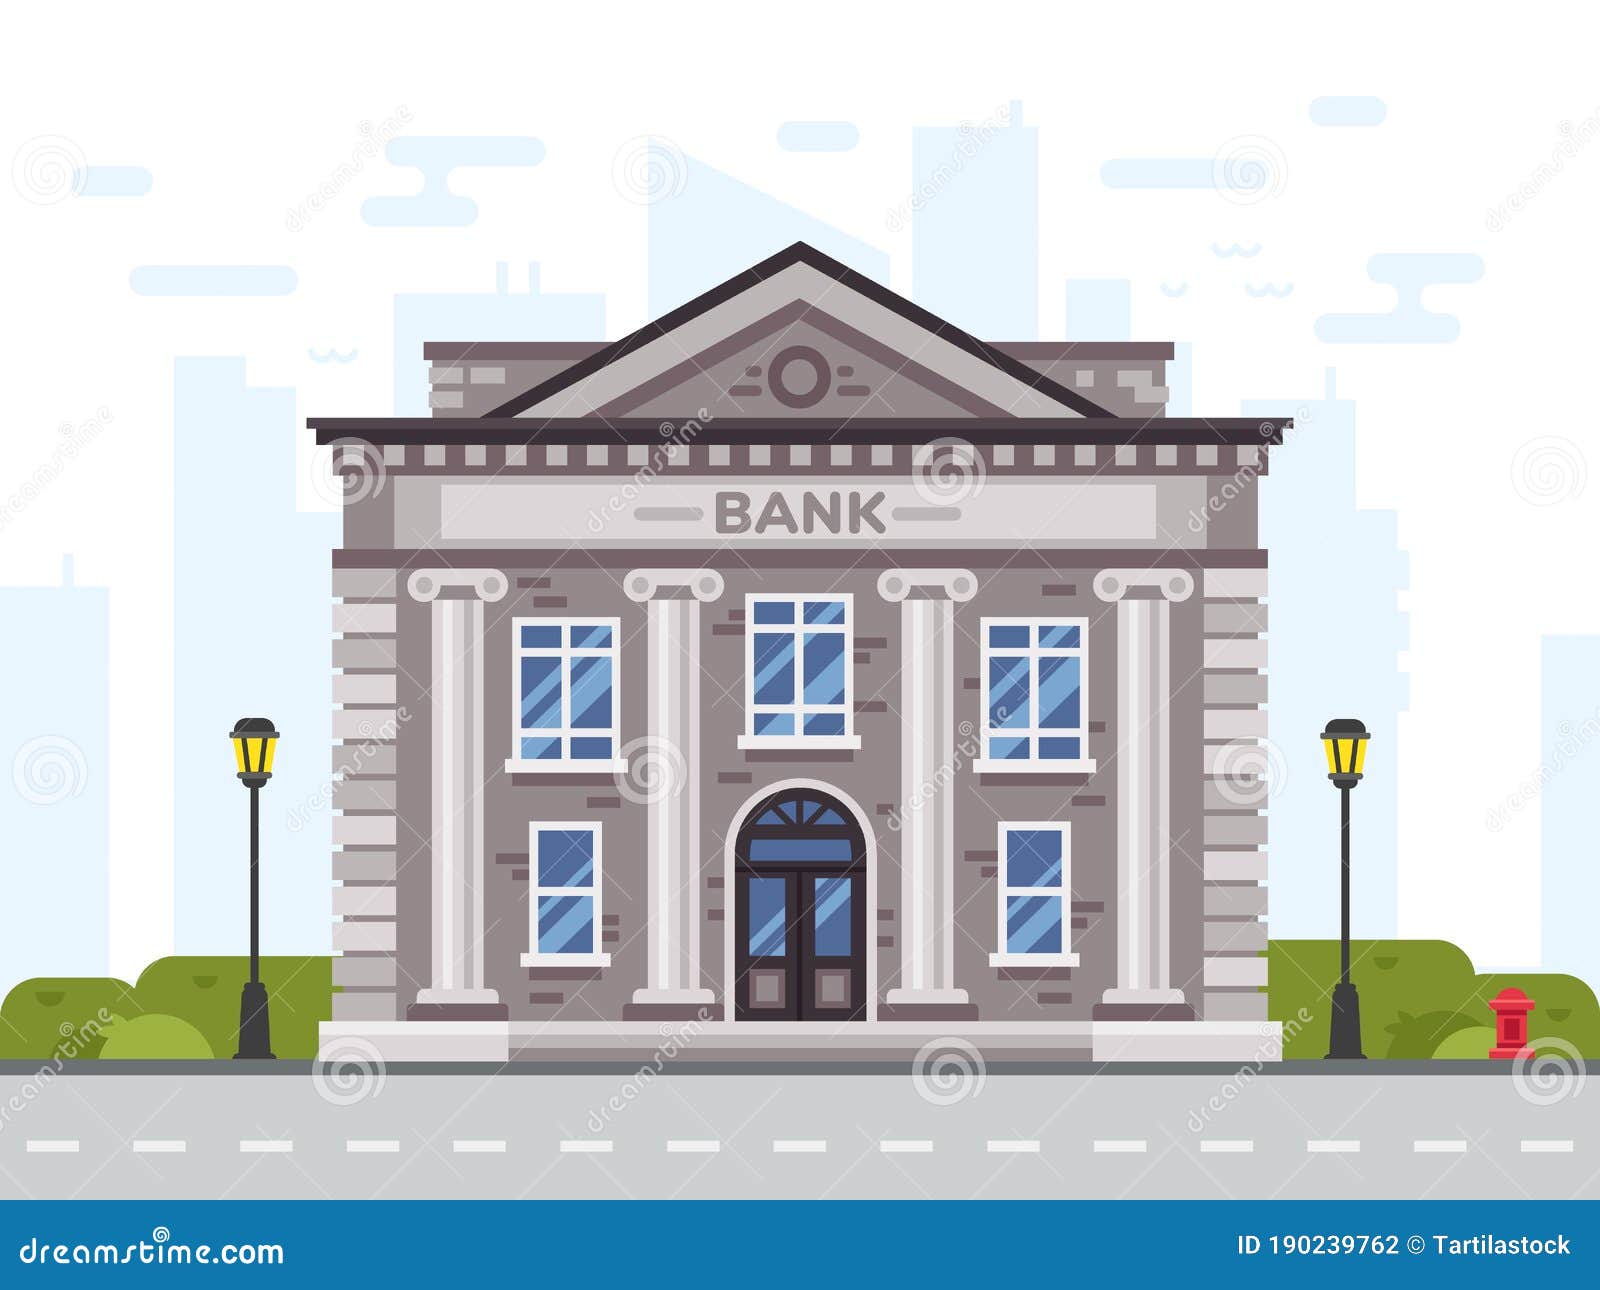 bank or government building, architecture with columns. classical public building facade or exterior